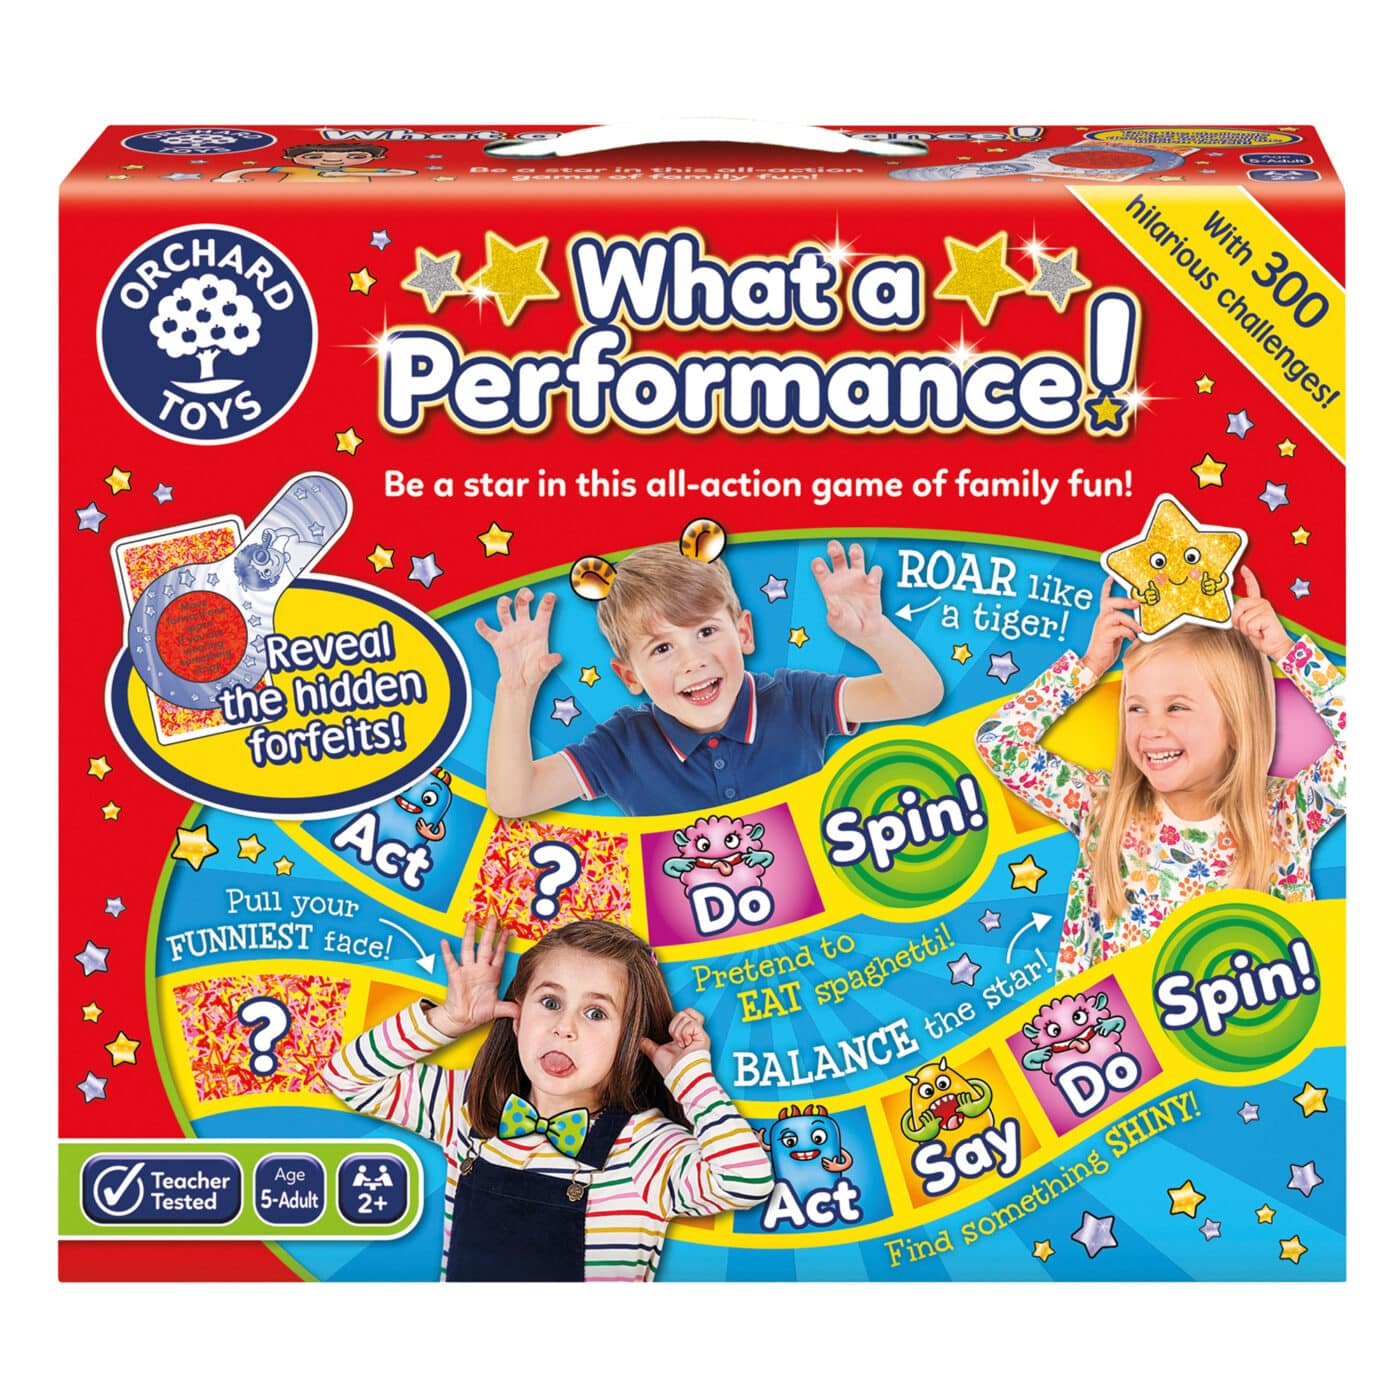 Orchard Toys What a Performance Game